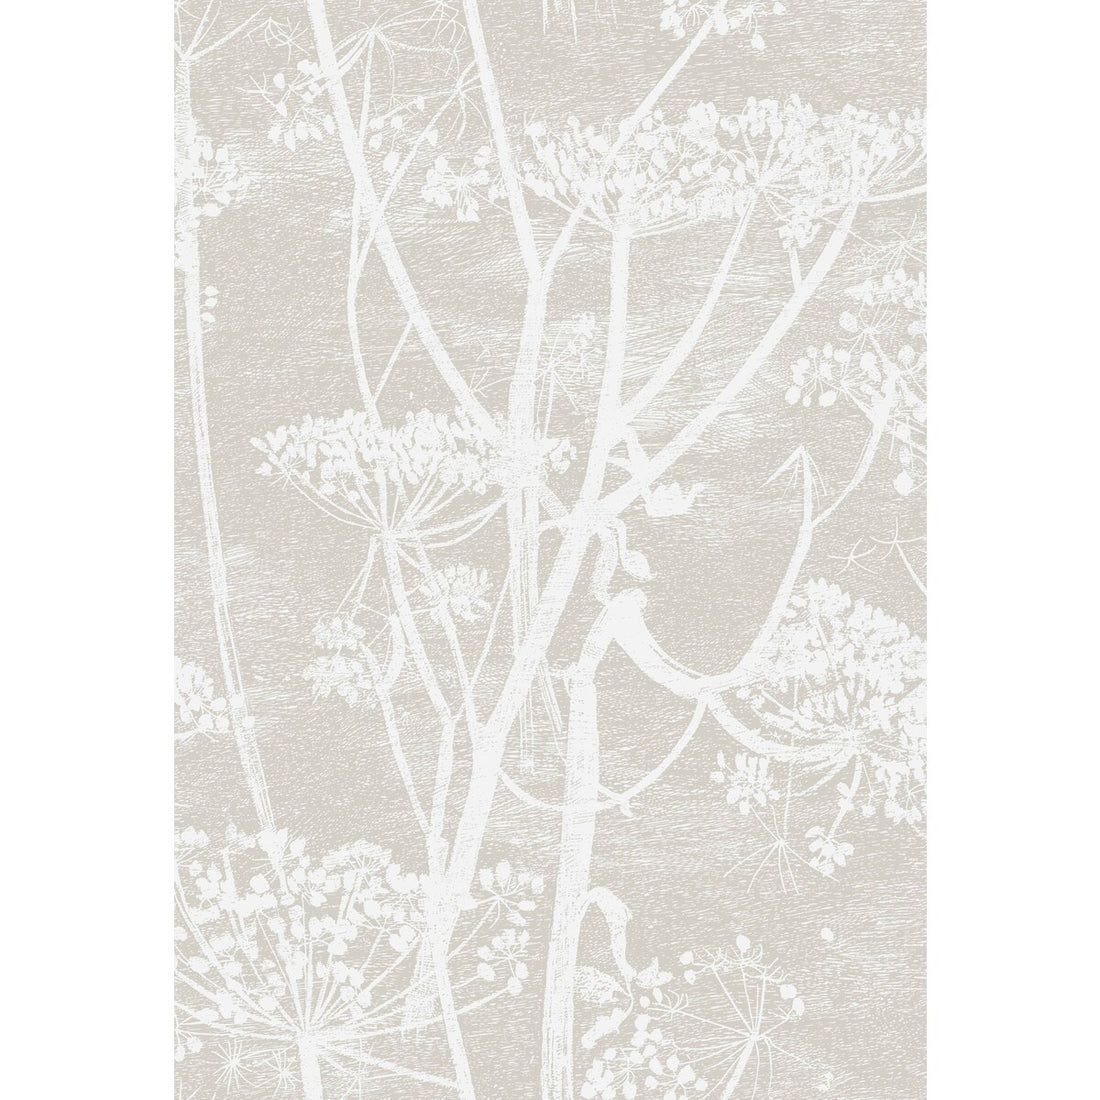 Cow Parsley fabric in wht taupe color - pattern F111/5019.CS.0 - by Cole &amp; Son in the Cole &amp; Son Contemporary Fabrics collection